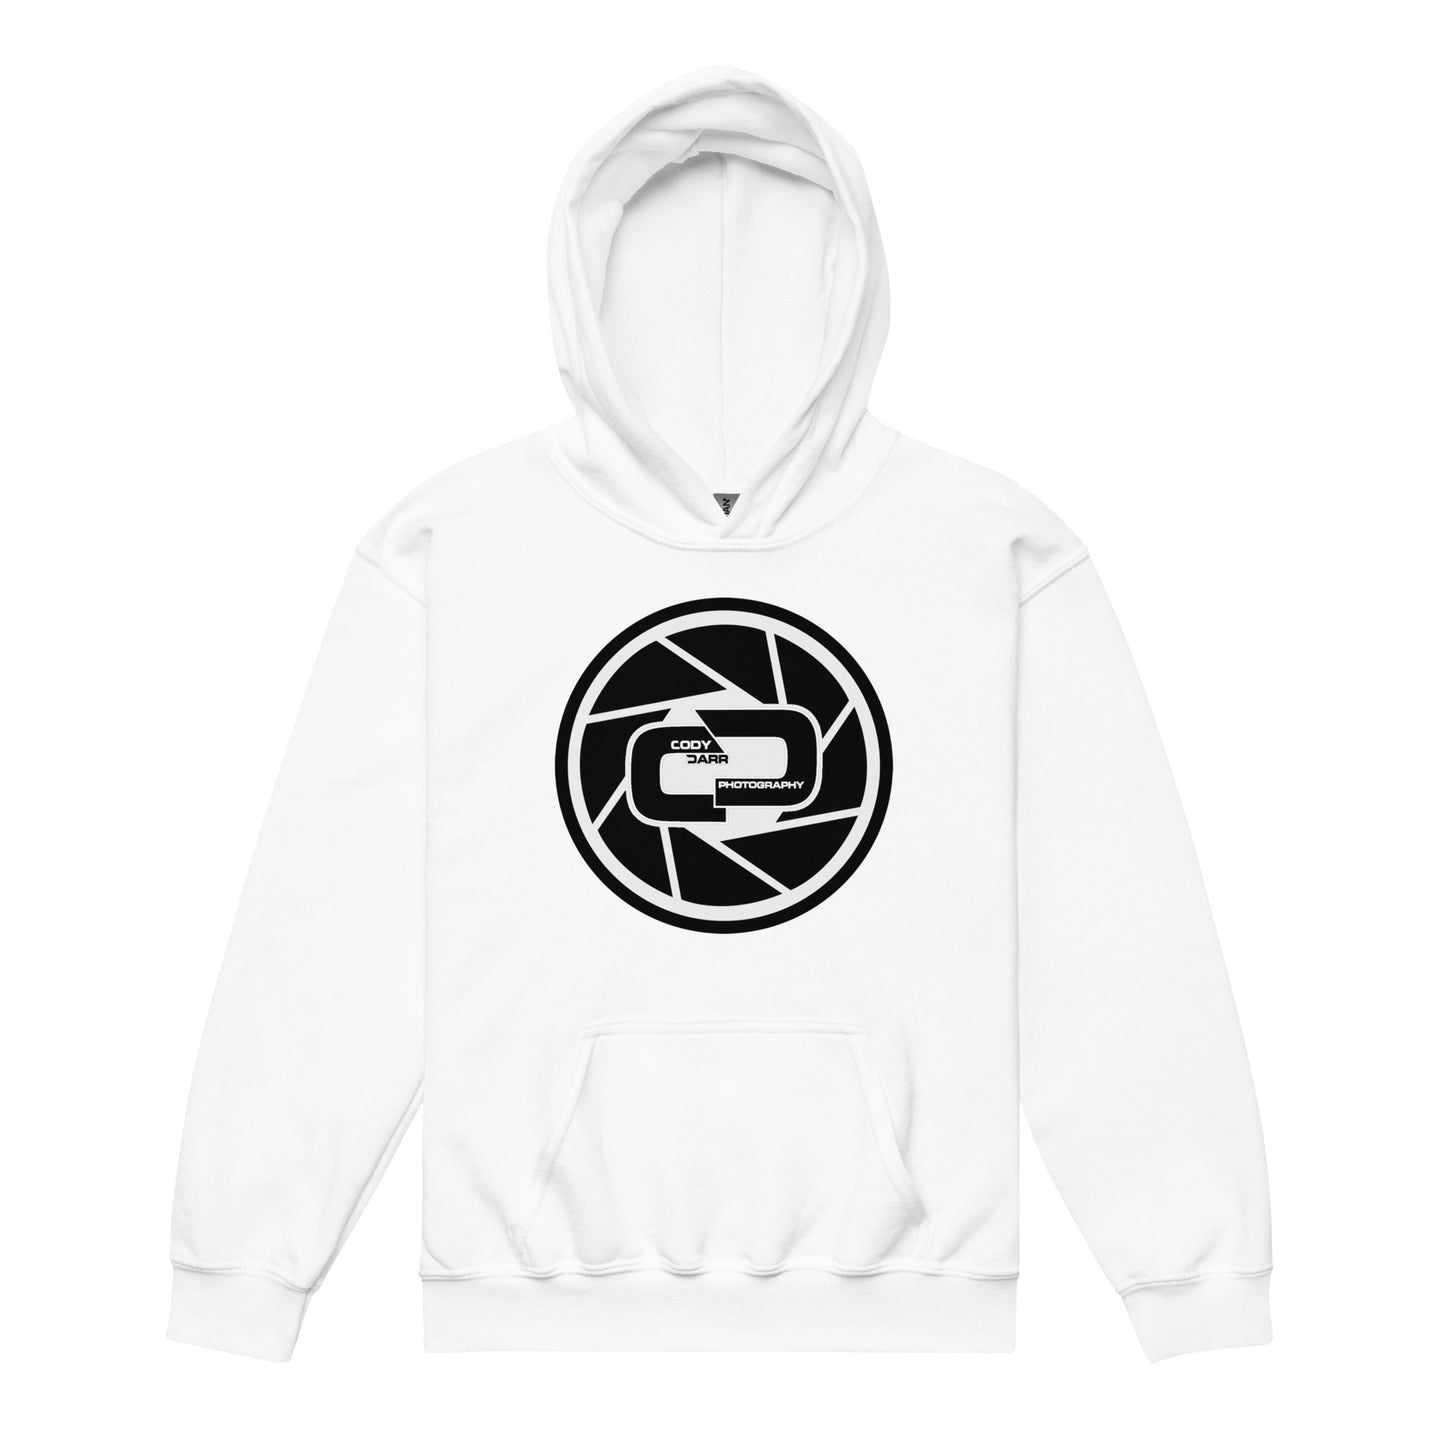 Cody Darr Photography YOUTH Hoodie